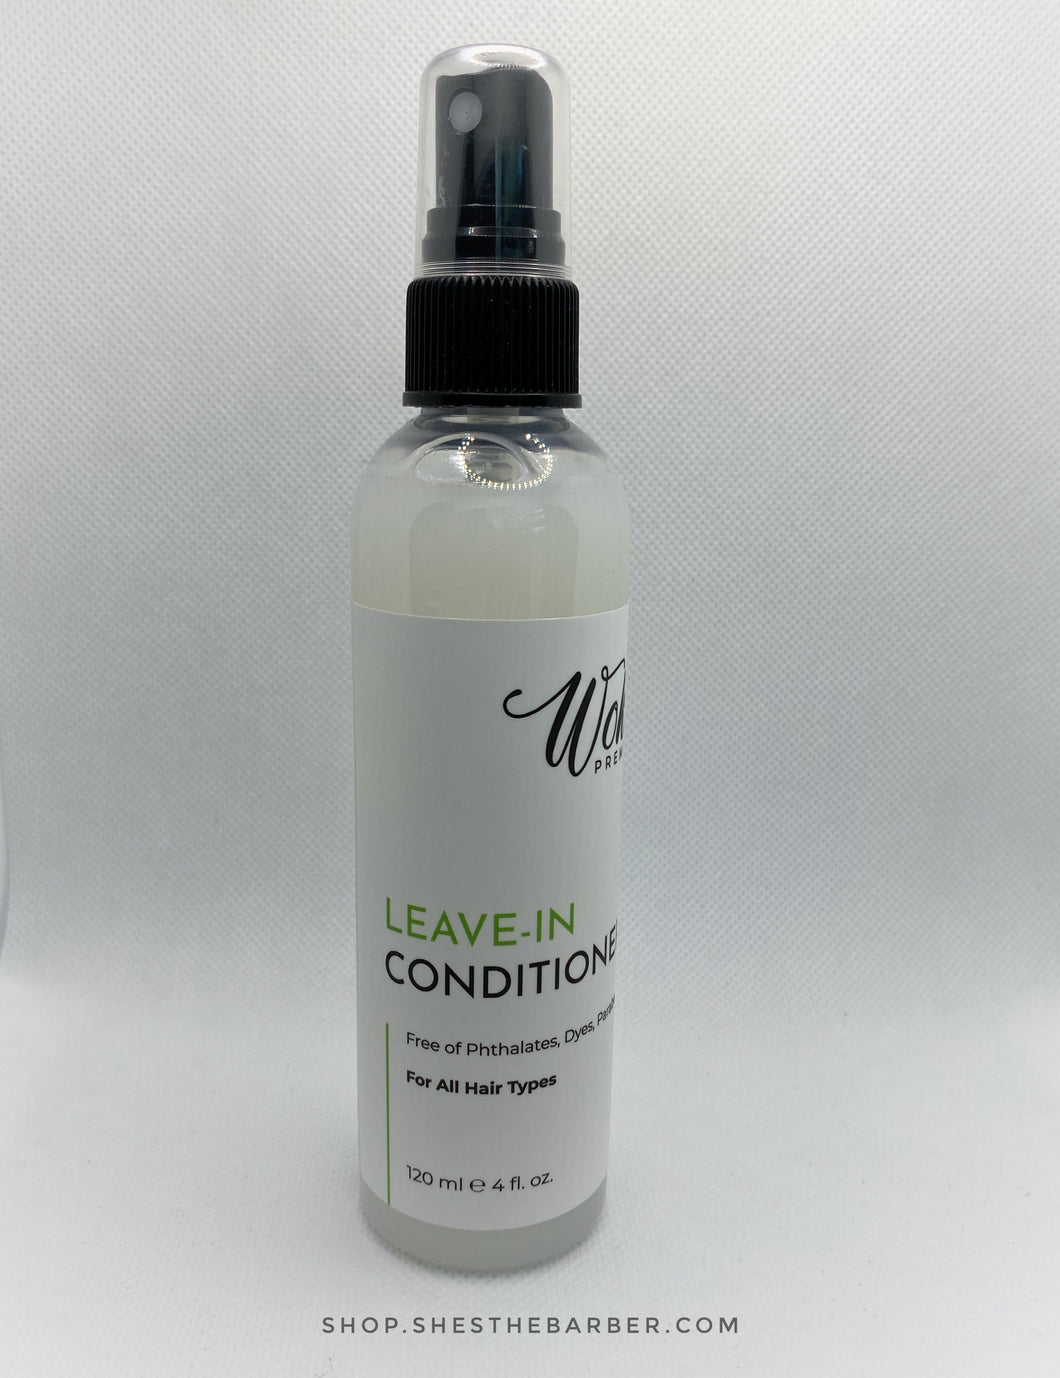 Beard Leave-In Conditioner